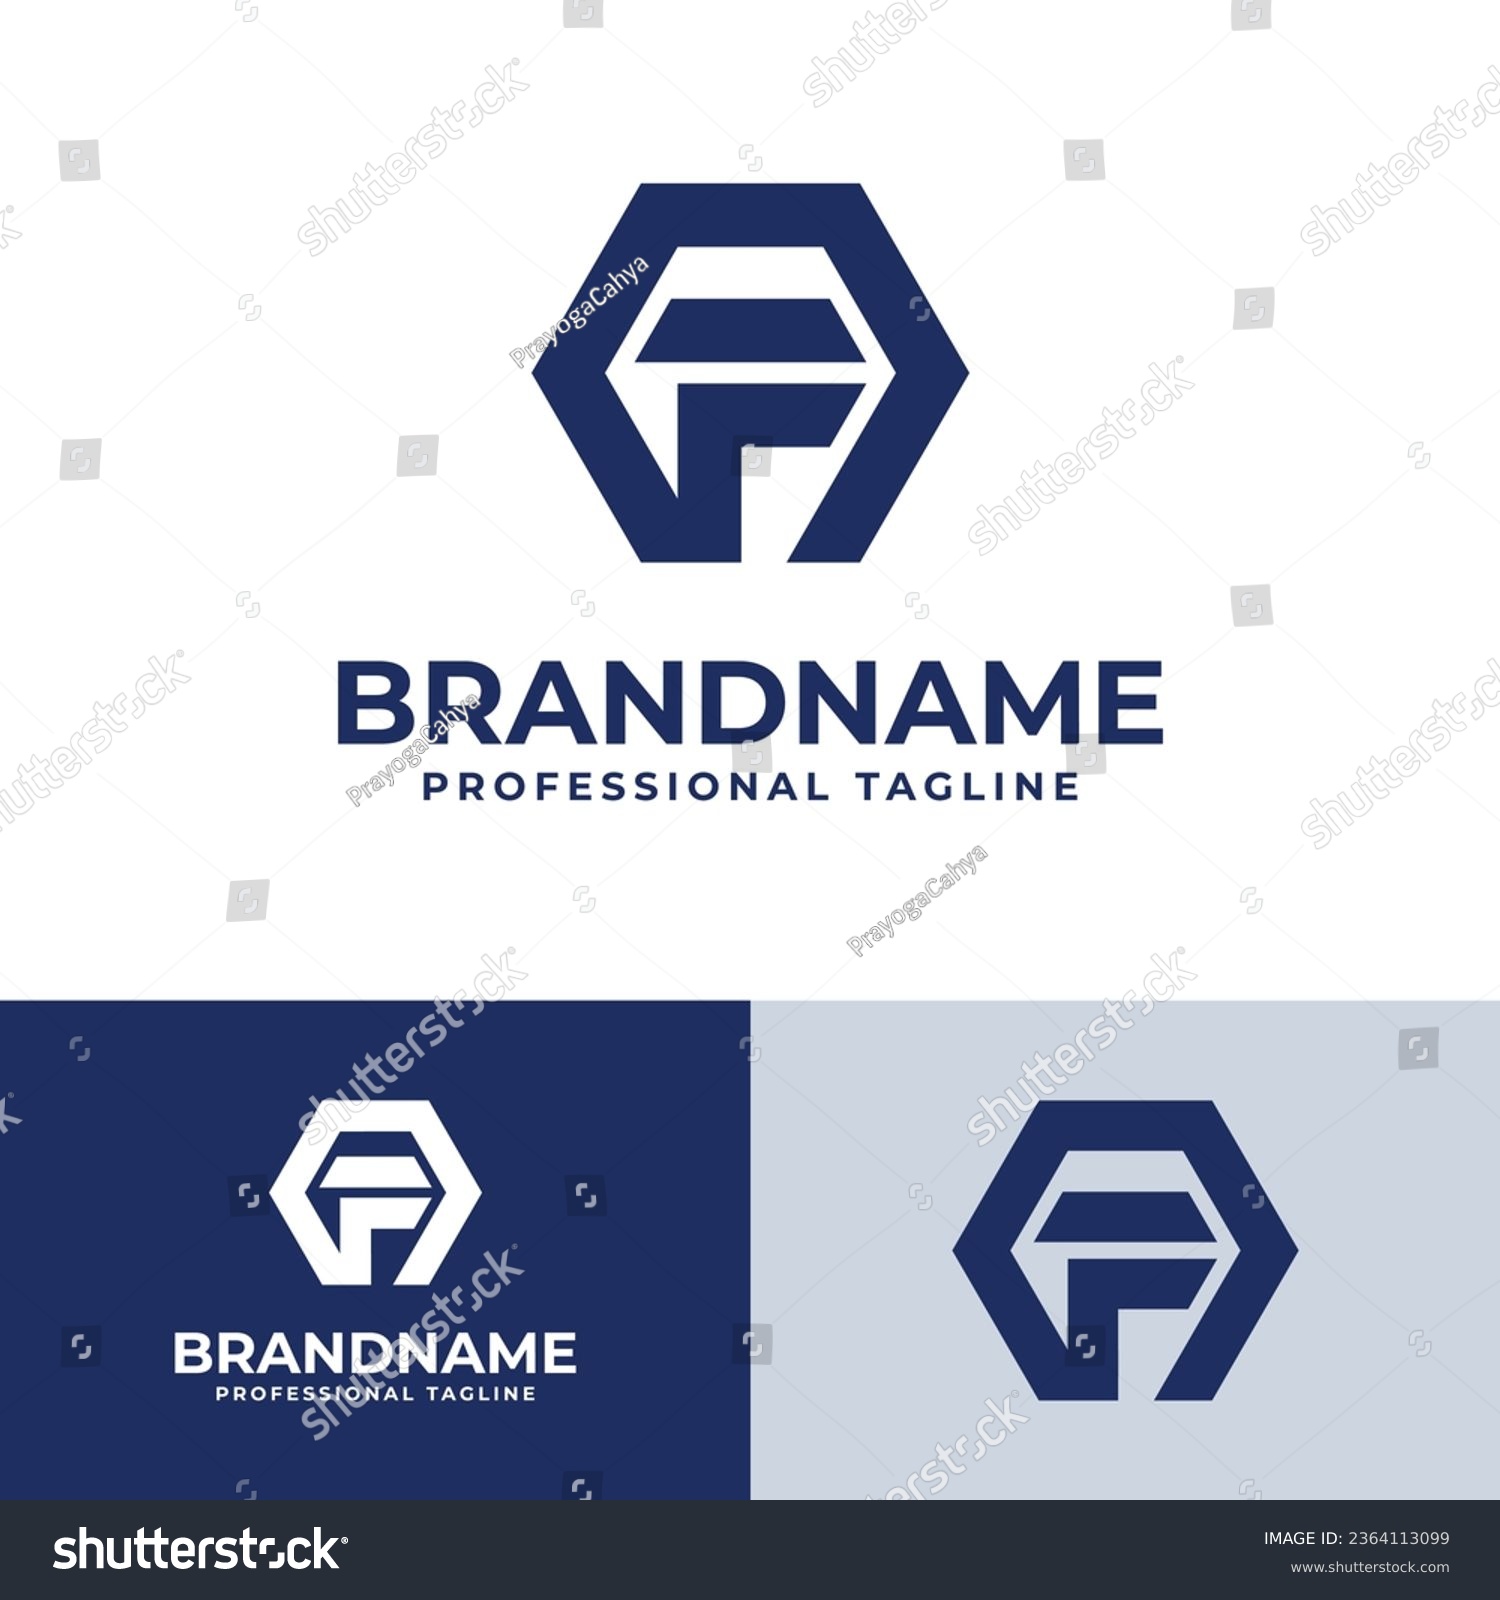 SVG of Letter AF Hexagonal Logo, suitable for any business related to Hexagonal with AF or FA initial. svg